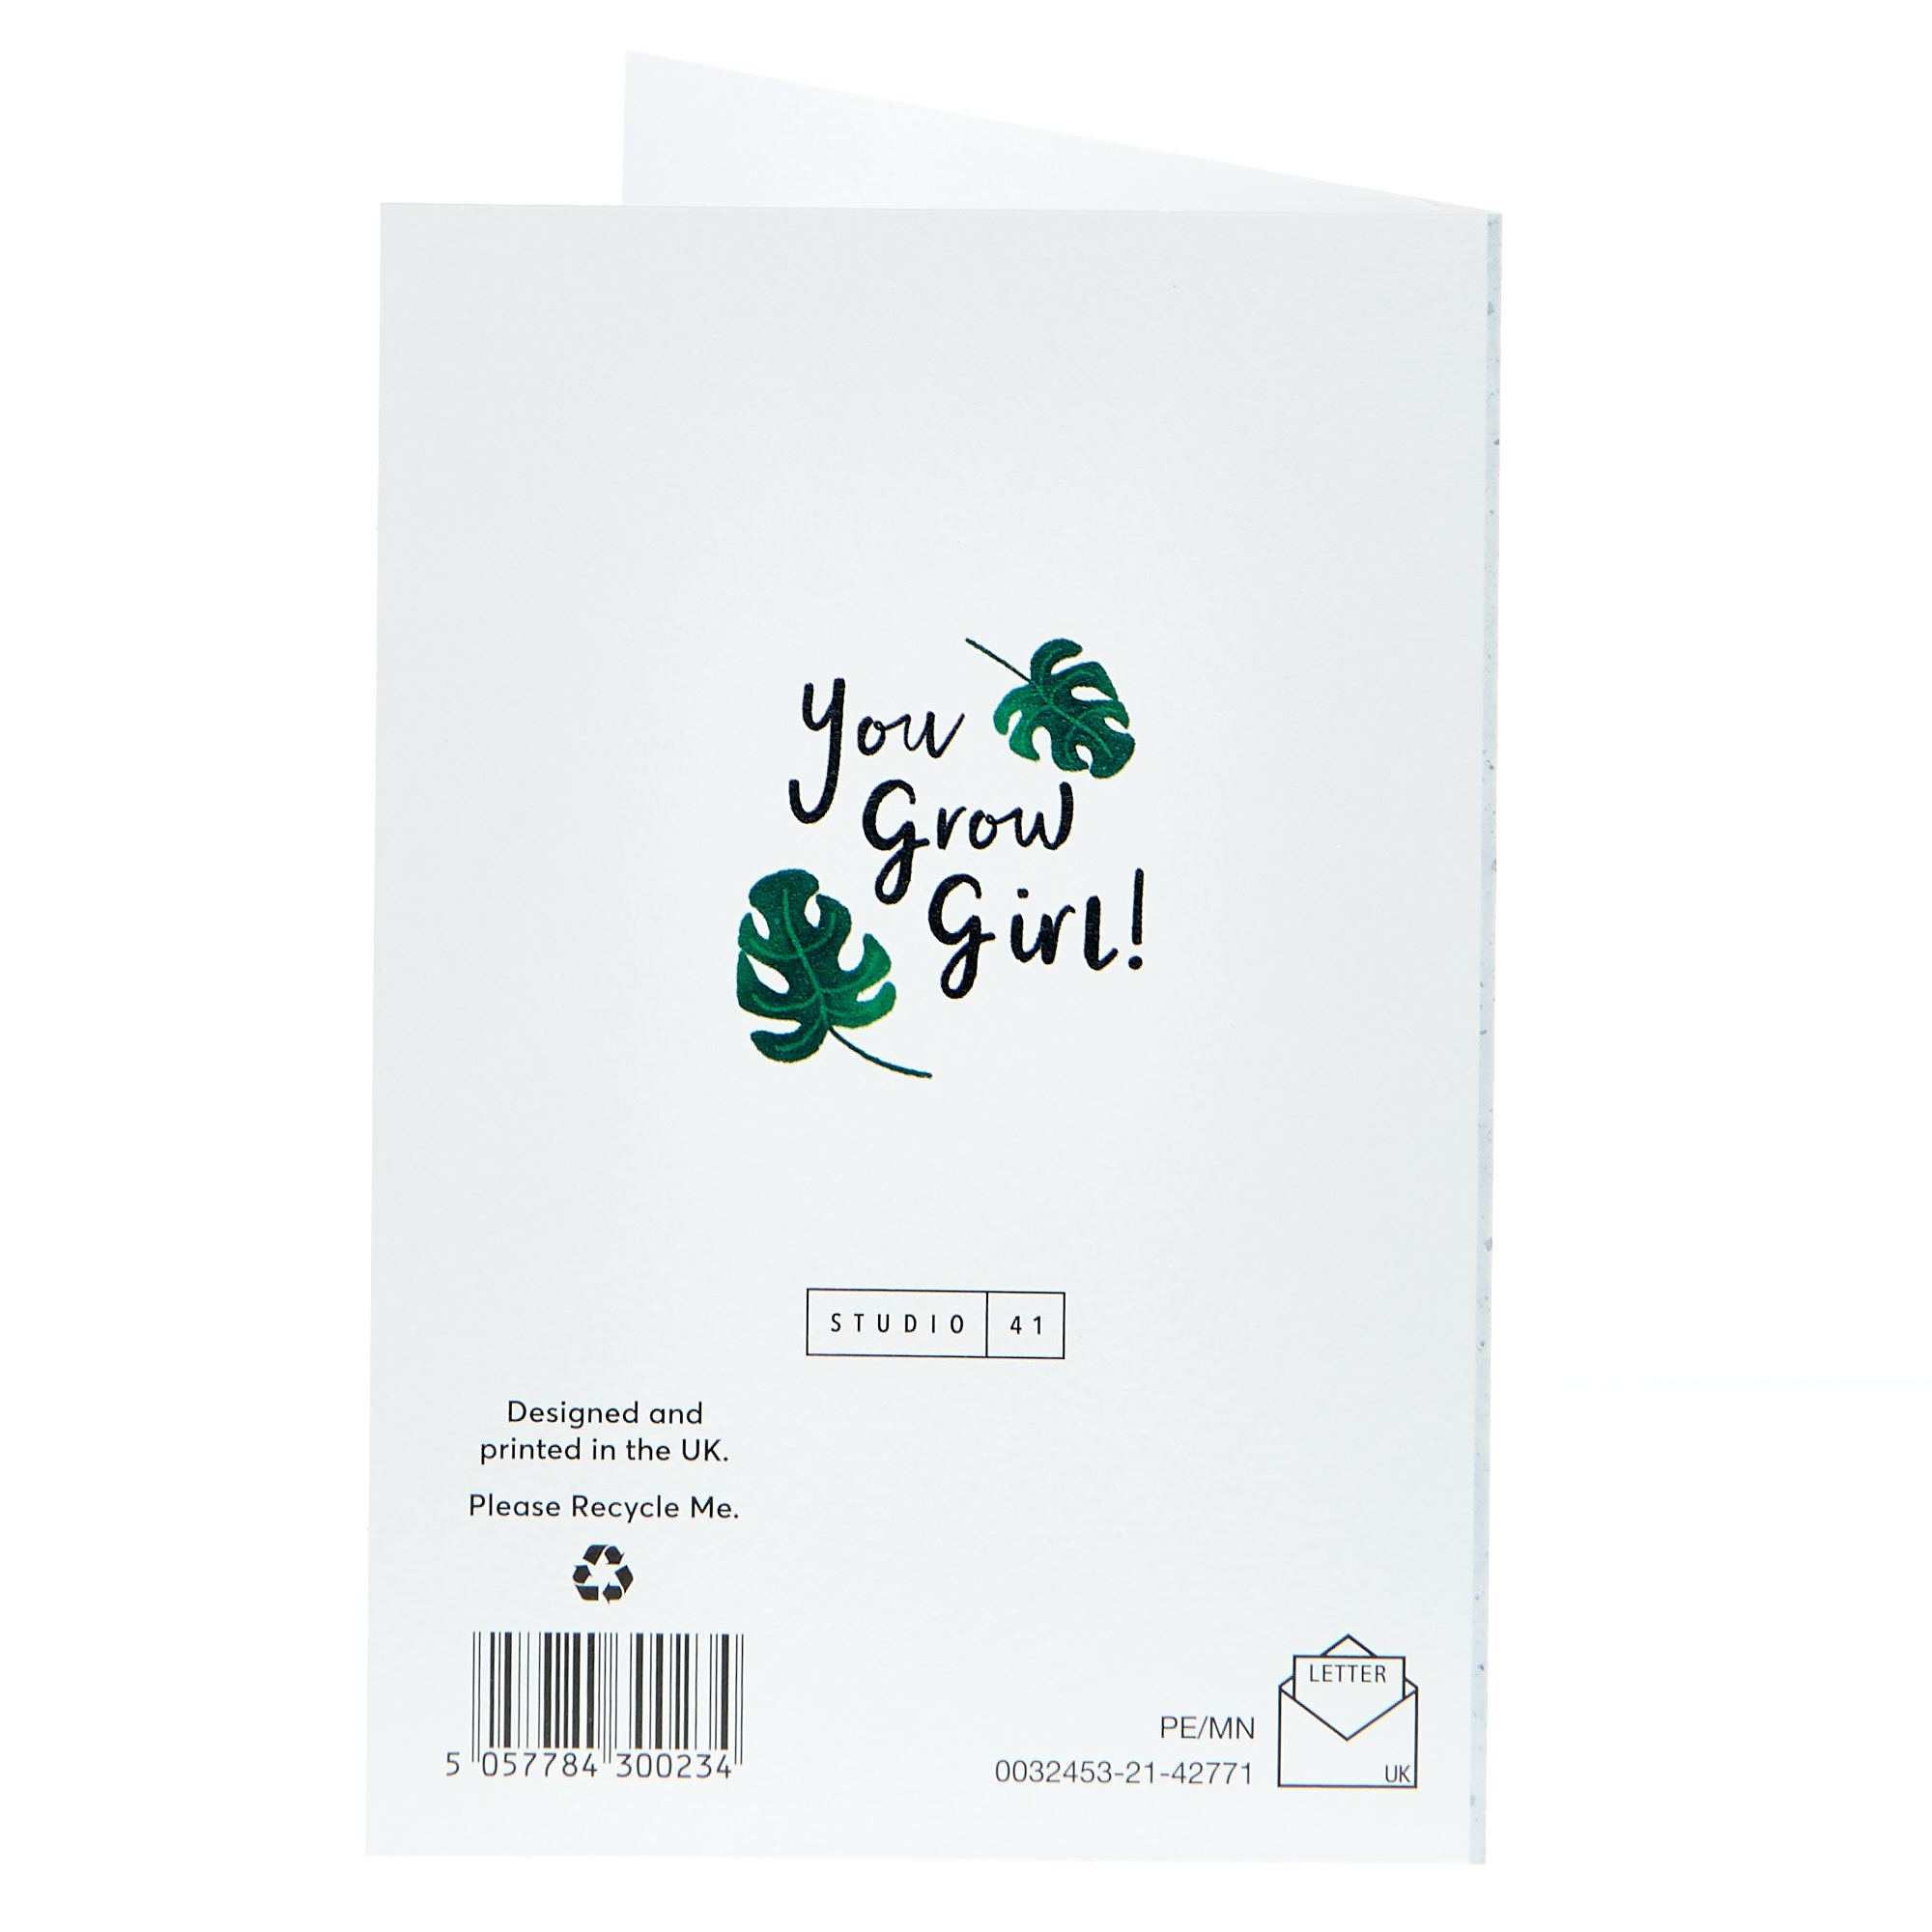 Any Occasion Card - Never Too Many Plants